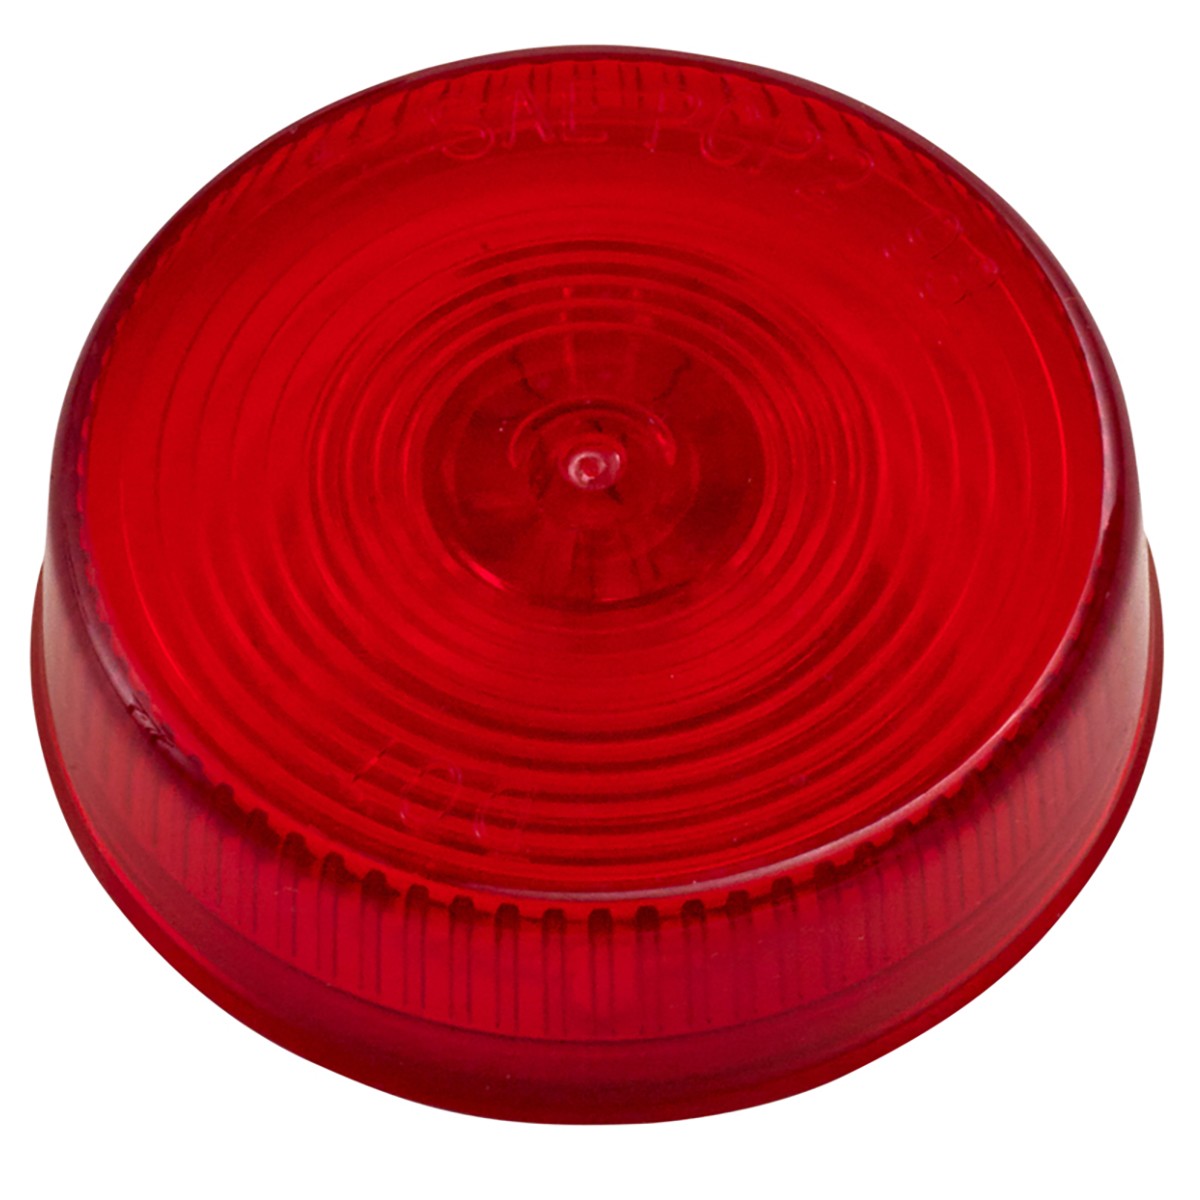 ROUND SEALED MKR LGT 2 1/2 .in RED